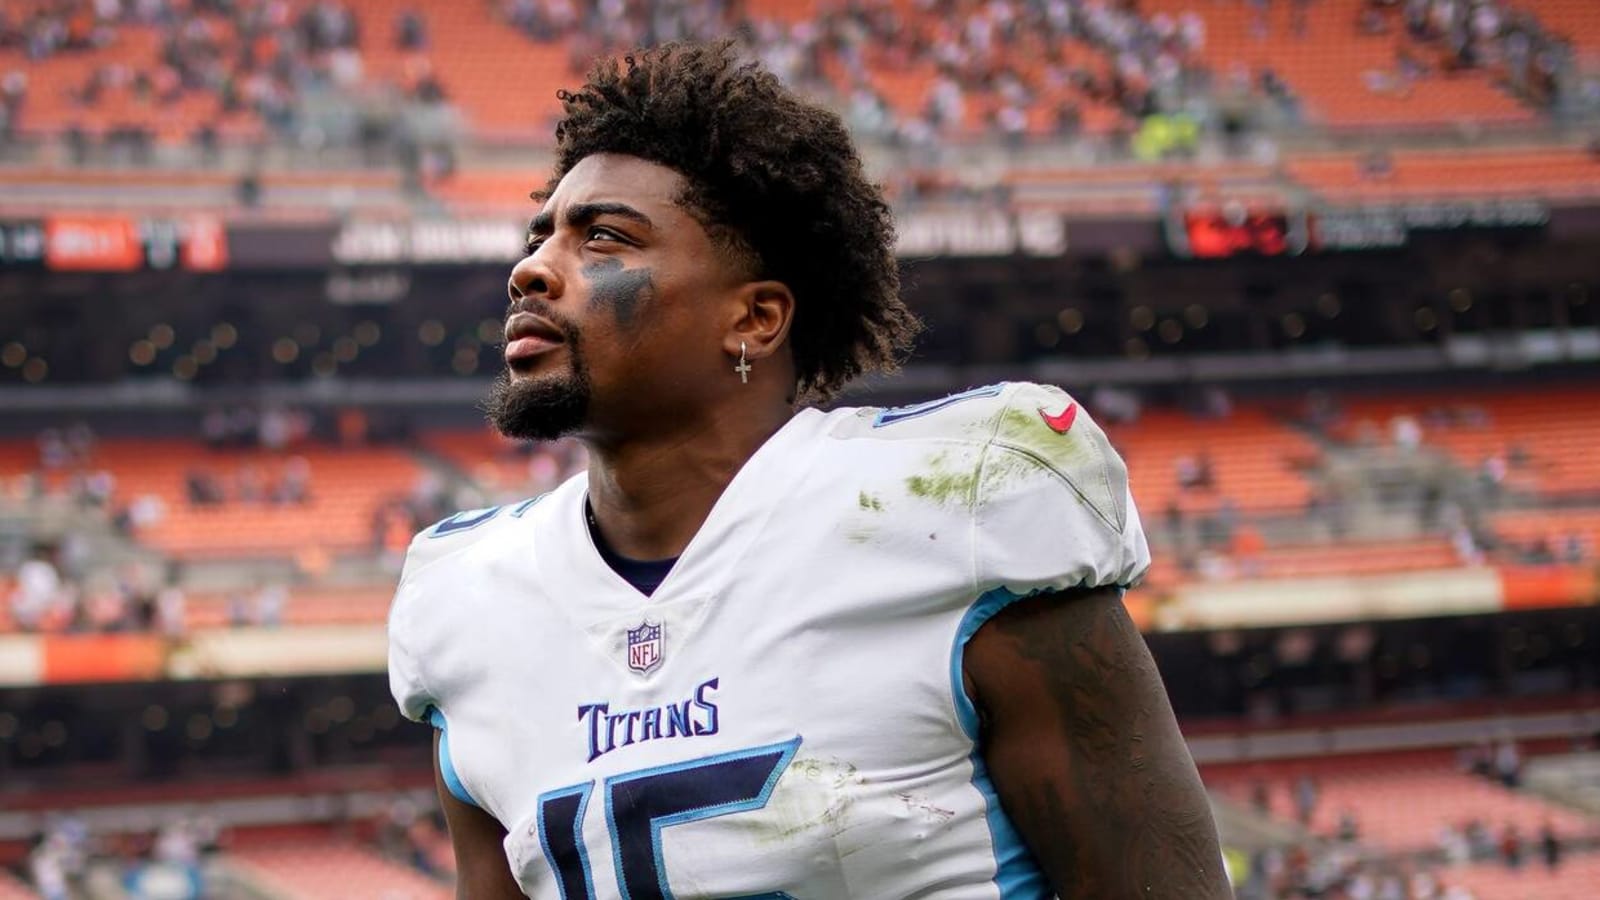 Insider speculates Titans 'planning to move on' from former first-round WR